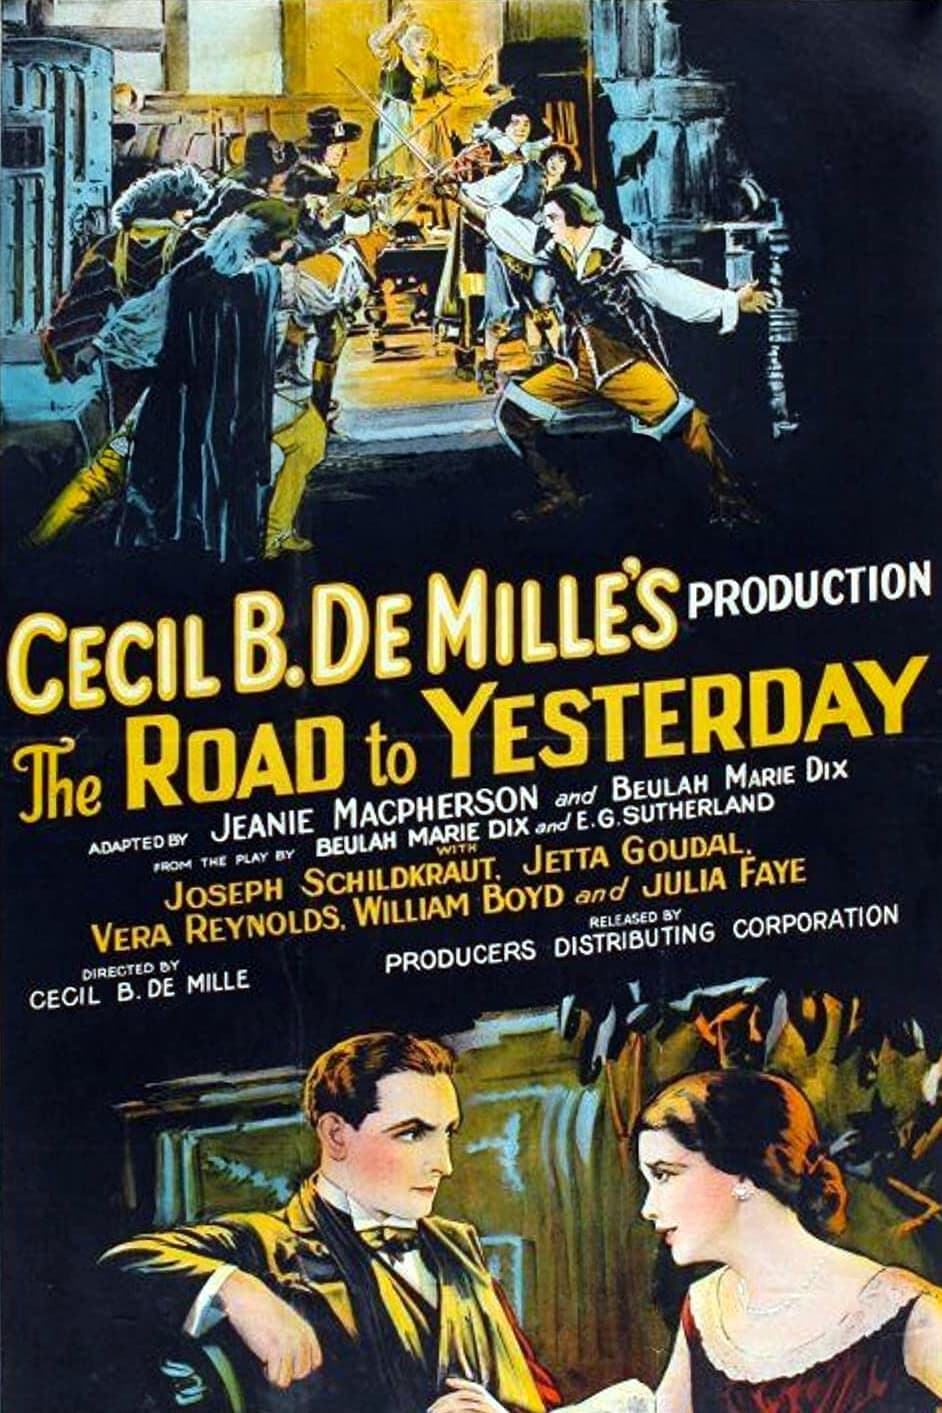 The Road to Yesterday